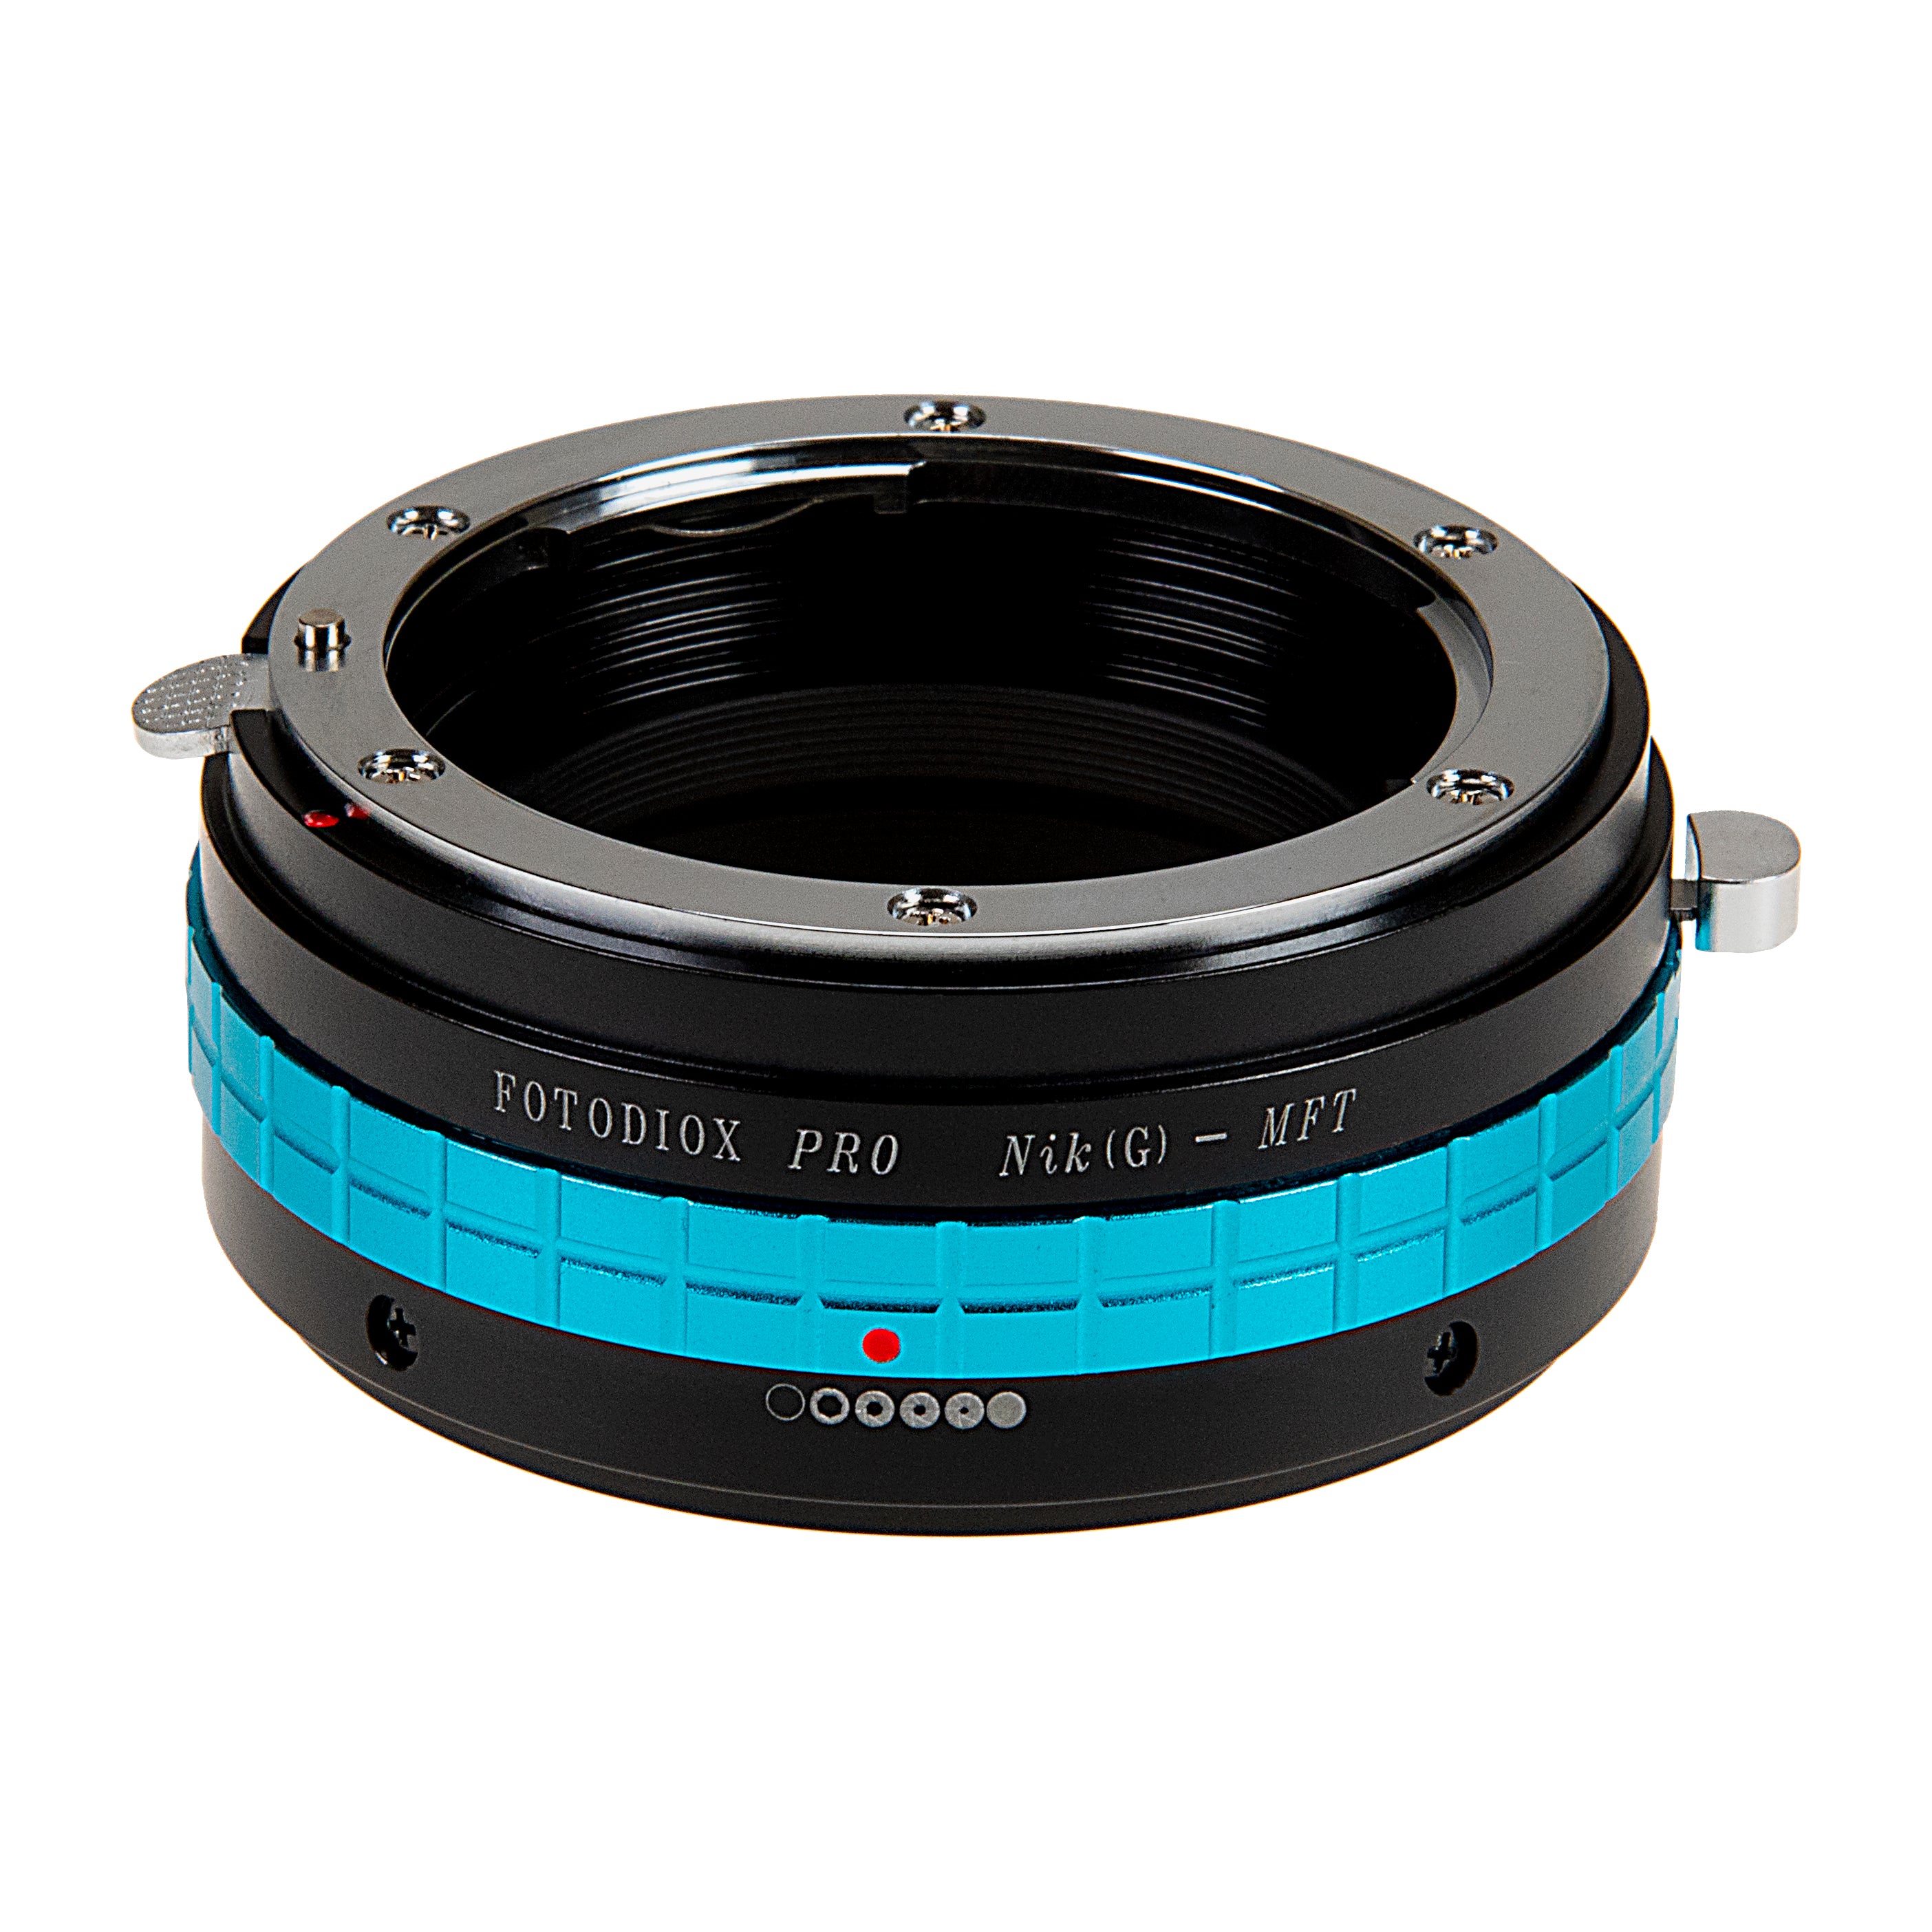 Fotodiox Pro Lens Mount Adapter - Nikon Nikkor F Mount G-Type D/SLR Lens to Micro Four Thirds (MFT, M4/3) Mount Mirrorless Camera Body, with Built-In Aperture Control Dial